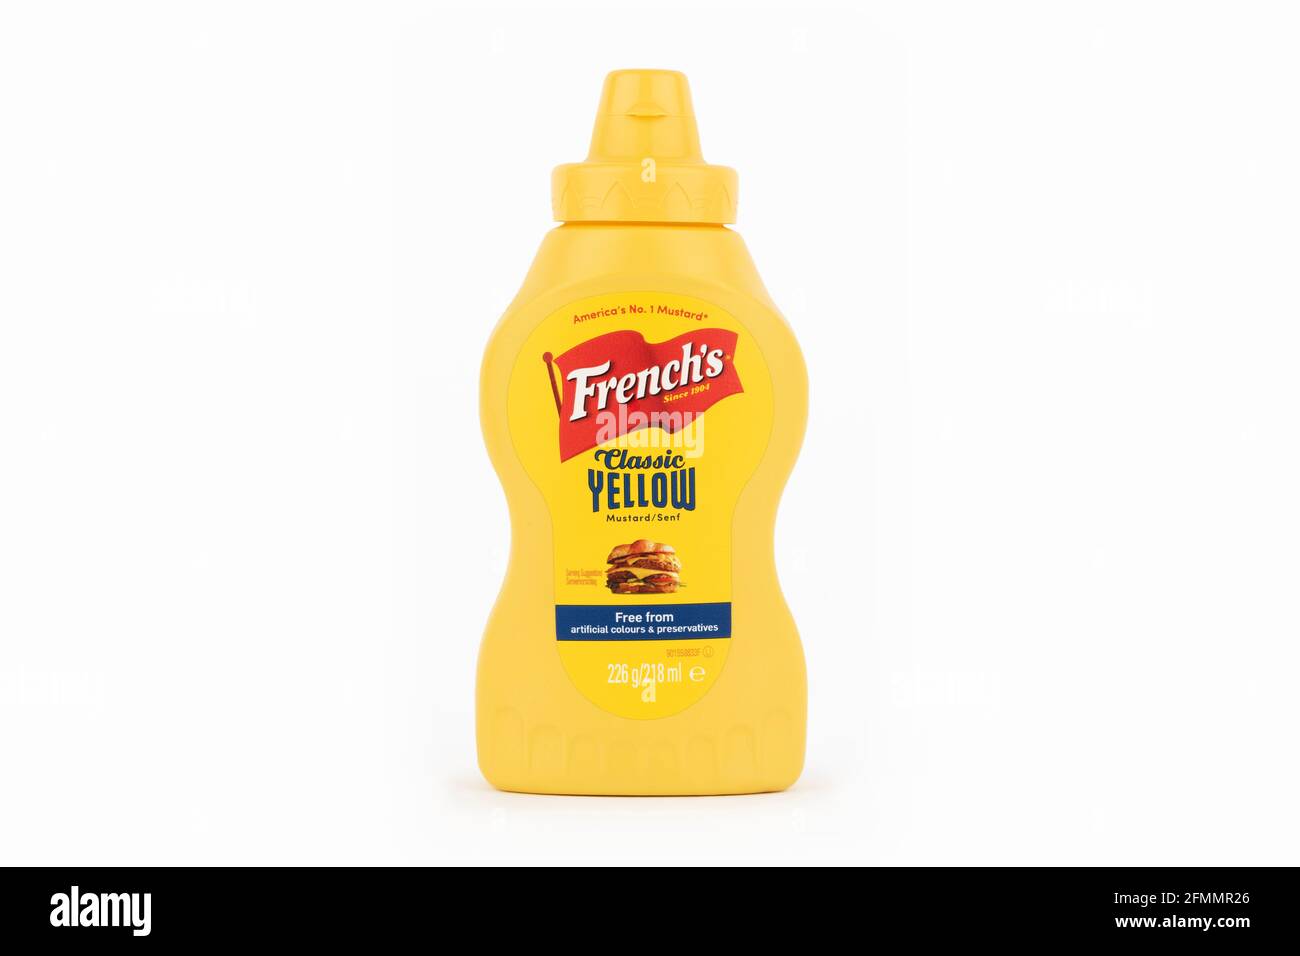 A bottle of French's Class Yellow mustard shot on a white background. Stock Photo